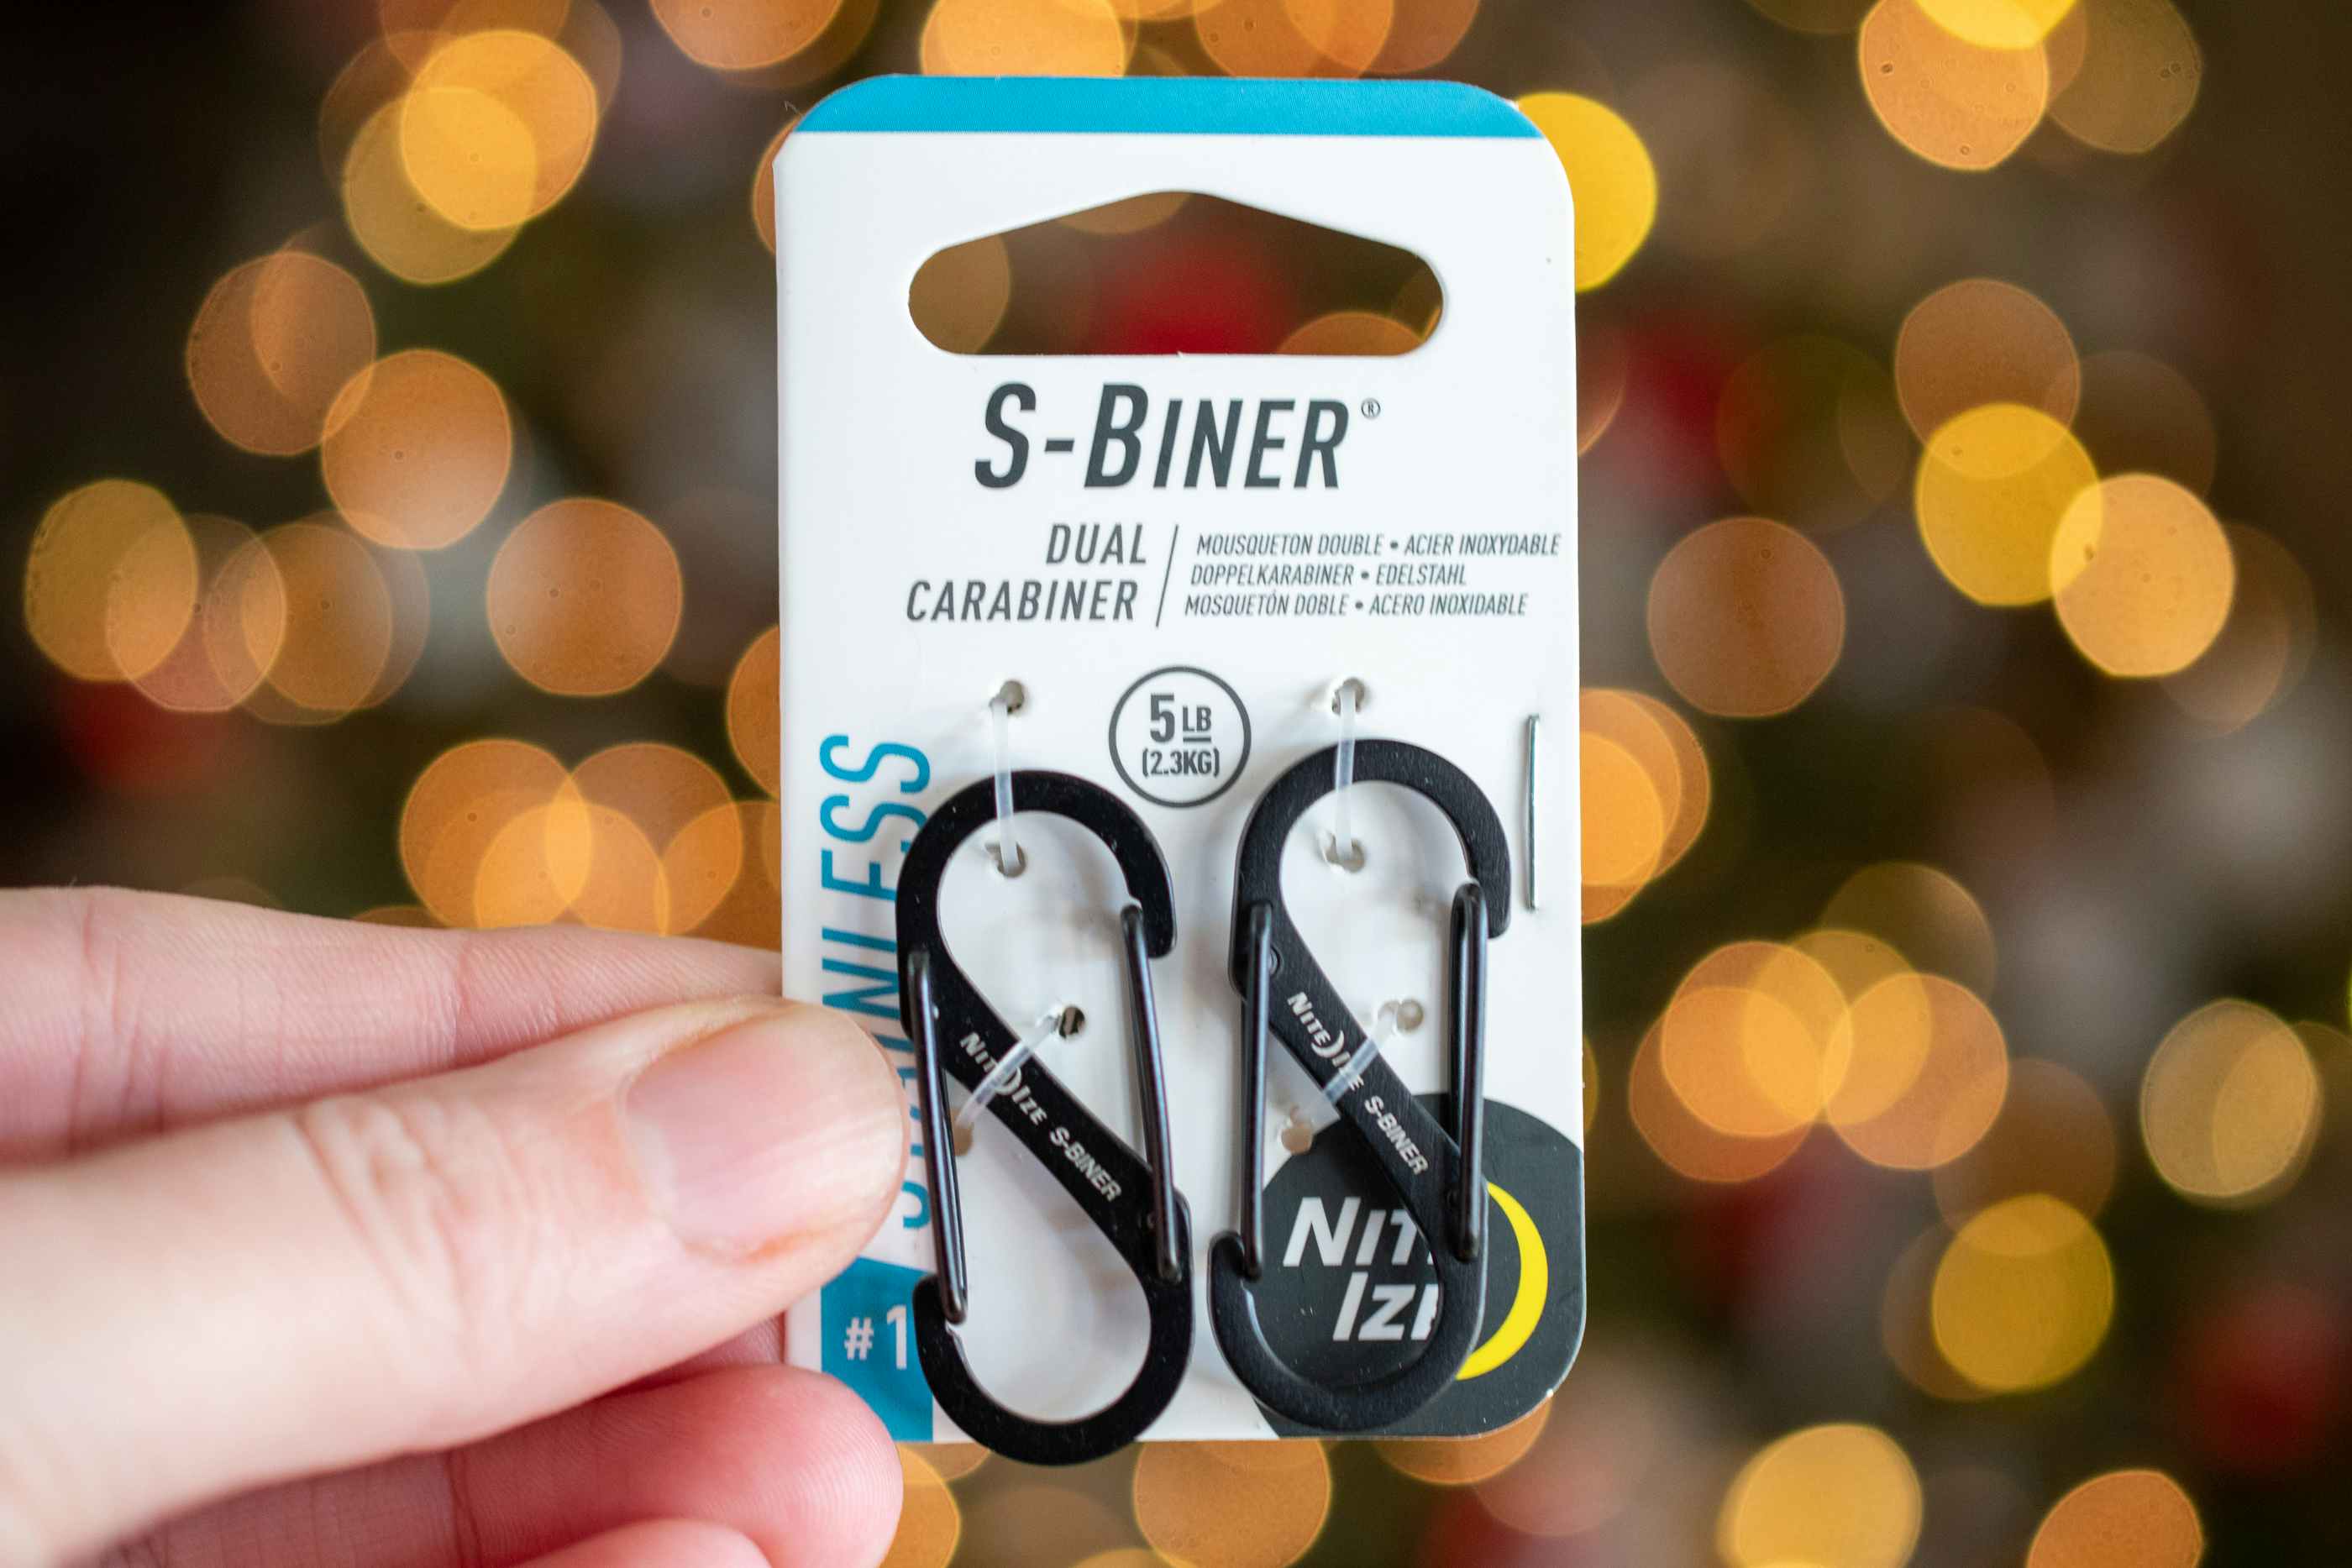 stocking stuffers under $5 - A pack of dual carabiner clips